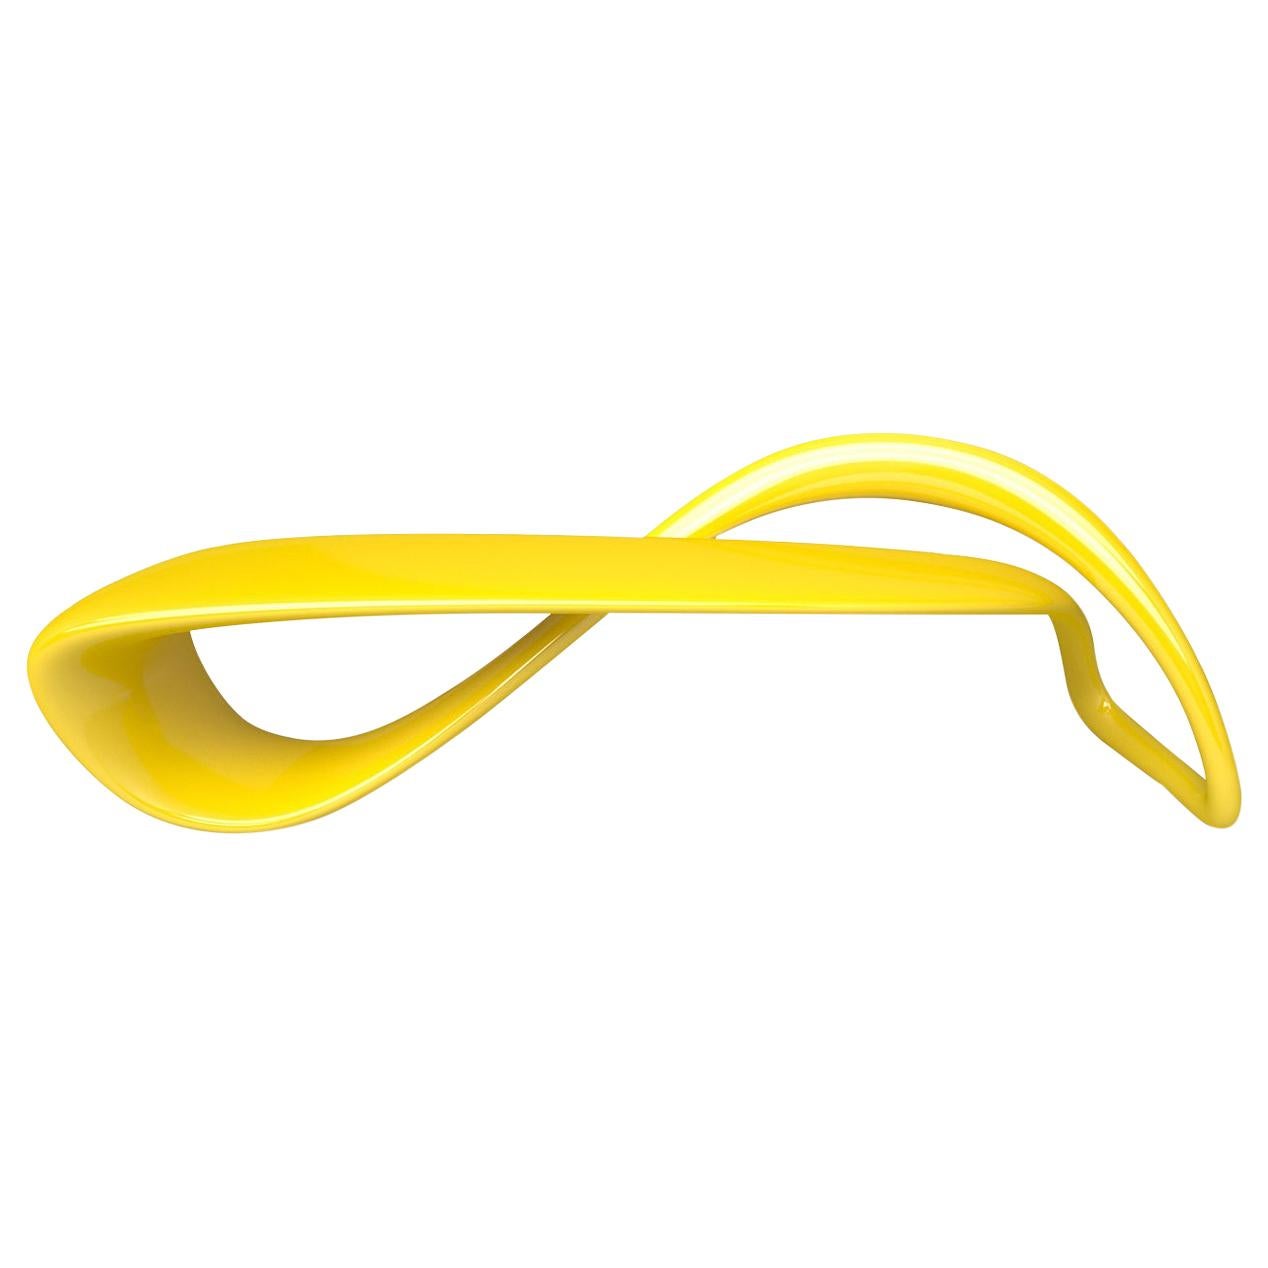 E-Turn, Lacquered Fibreglass Sculptural Bench Seat in Yellow by Brodie Neill